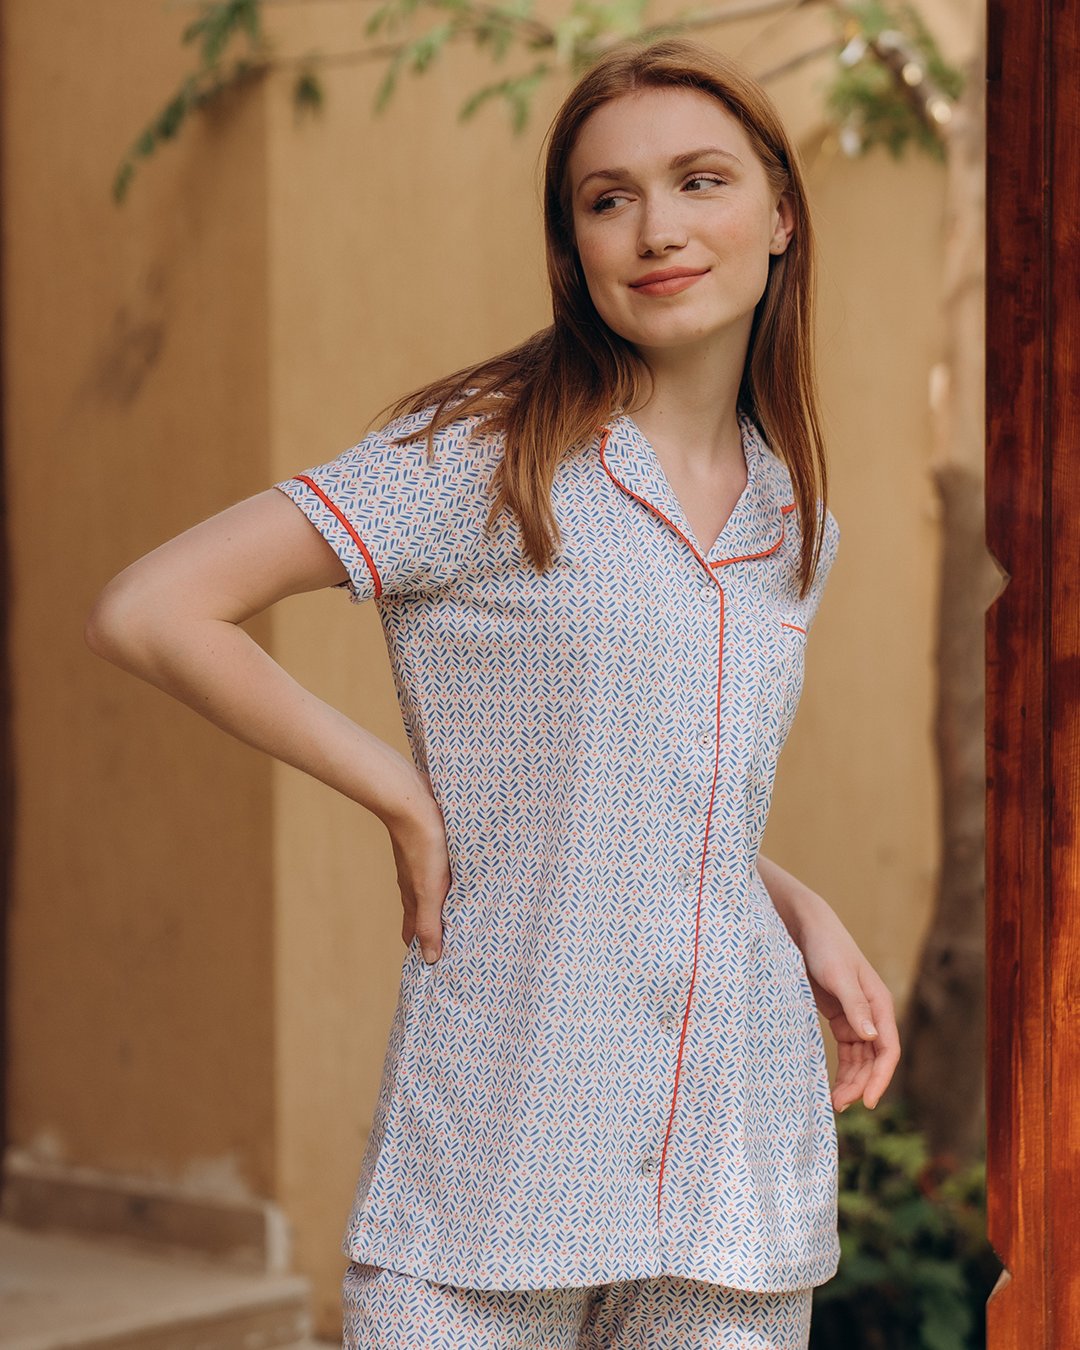 Classic women's pajamas with buttons, a pocket on the chest